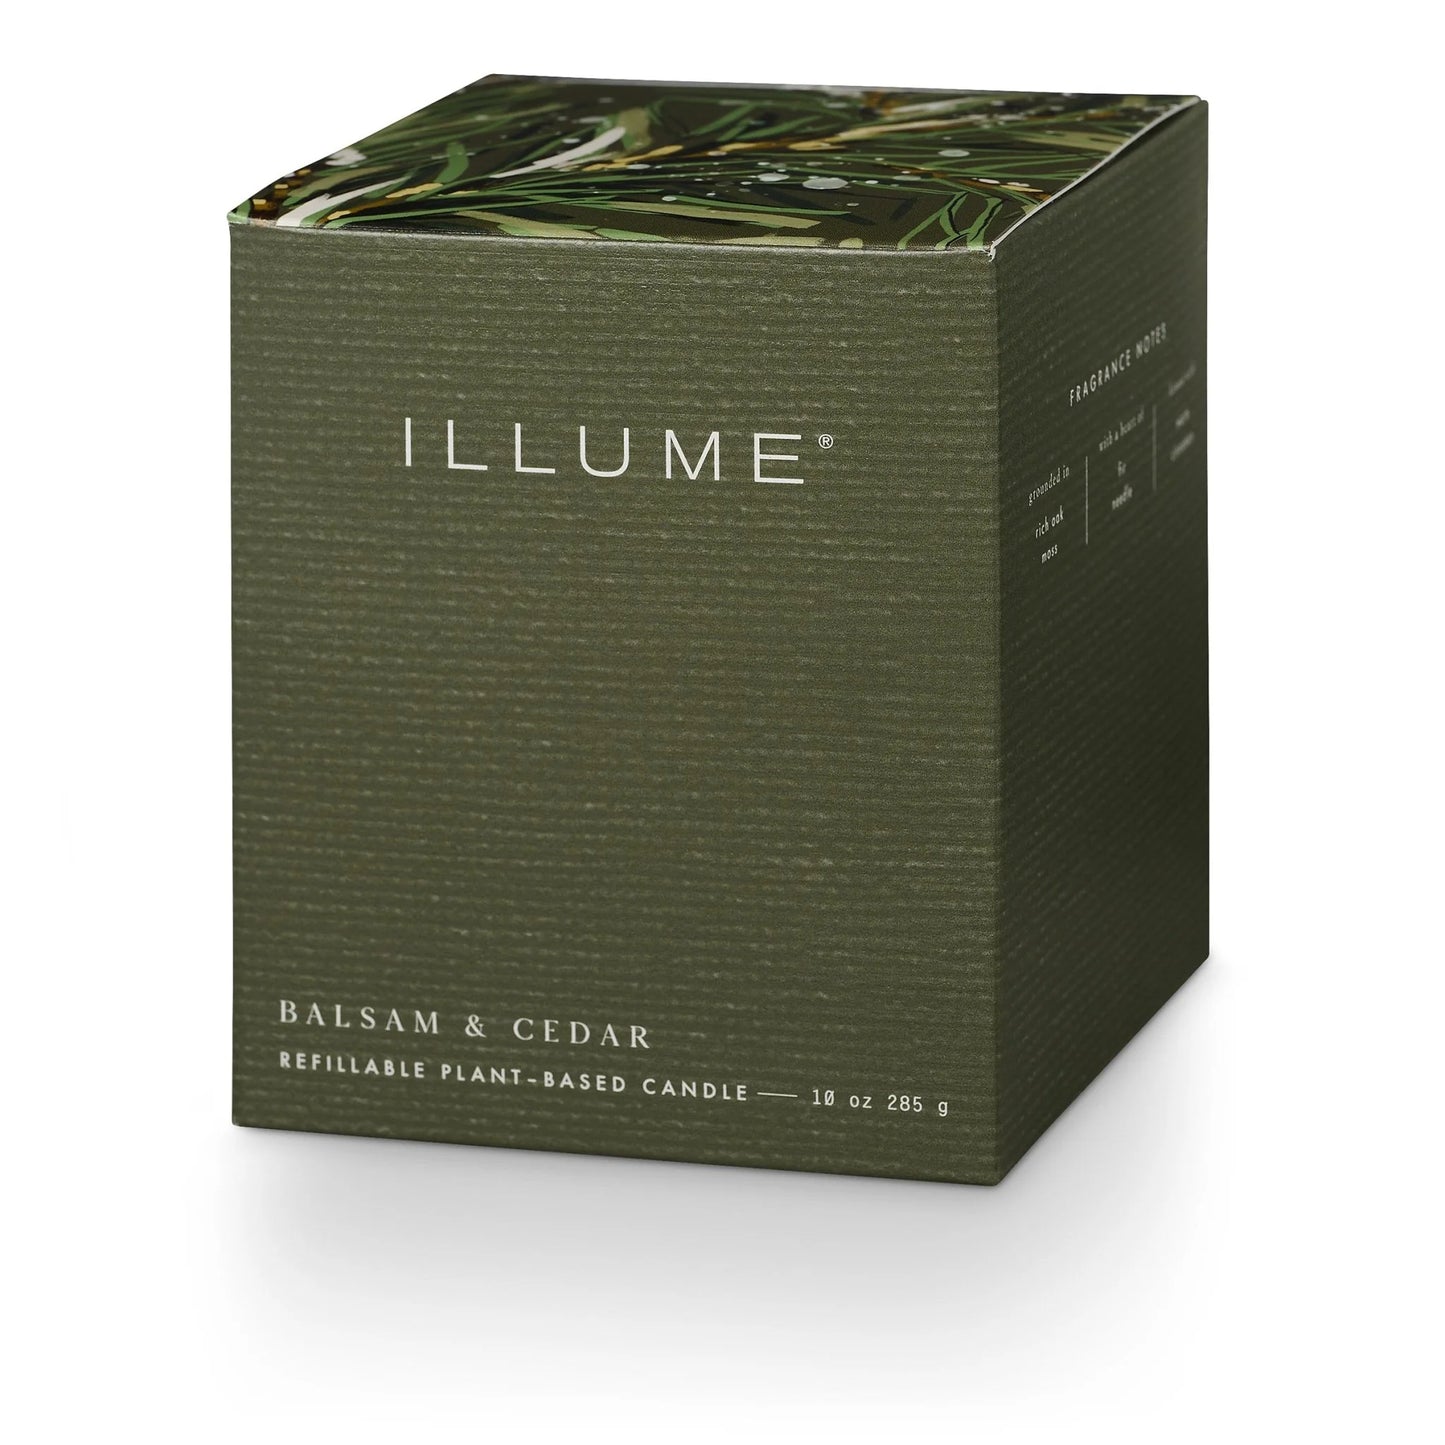 ILLUME REFILLABLE BOXED GLASS CANDLE